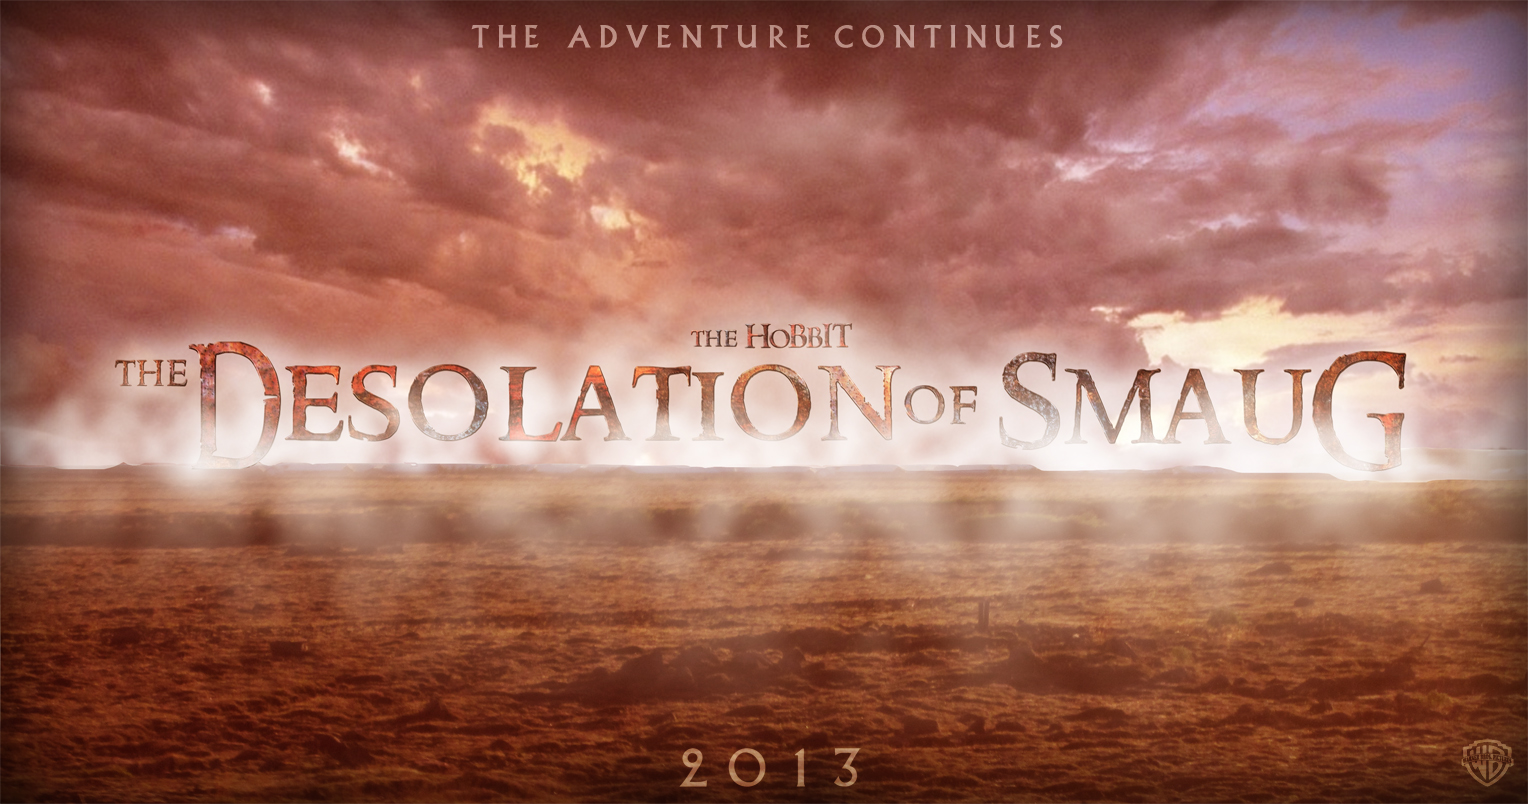 The Hobbit: The Desolation of Smaug banner poster